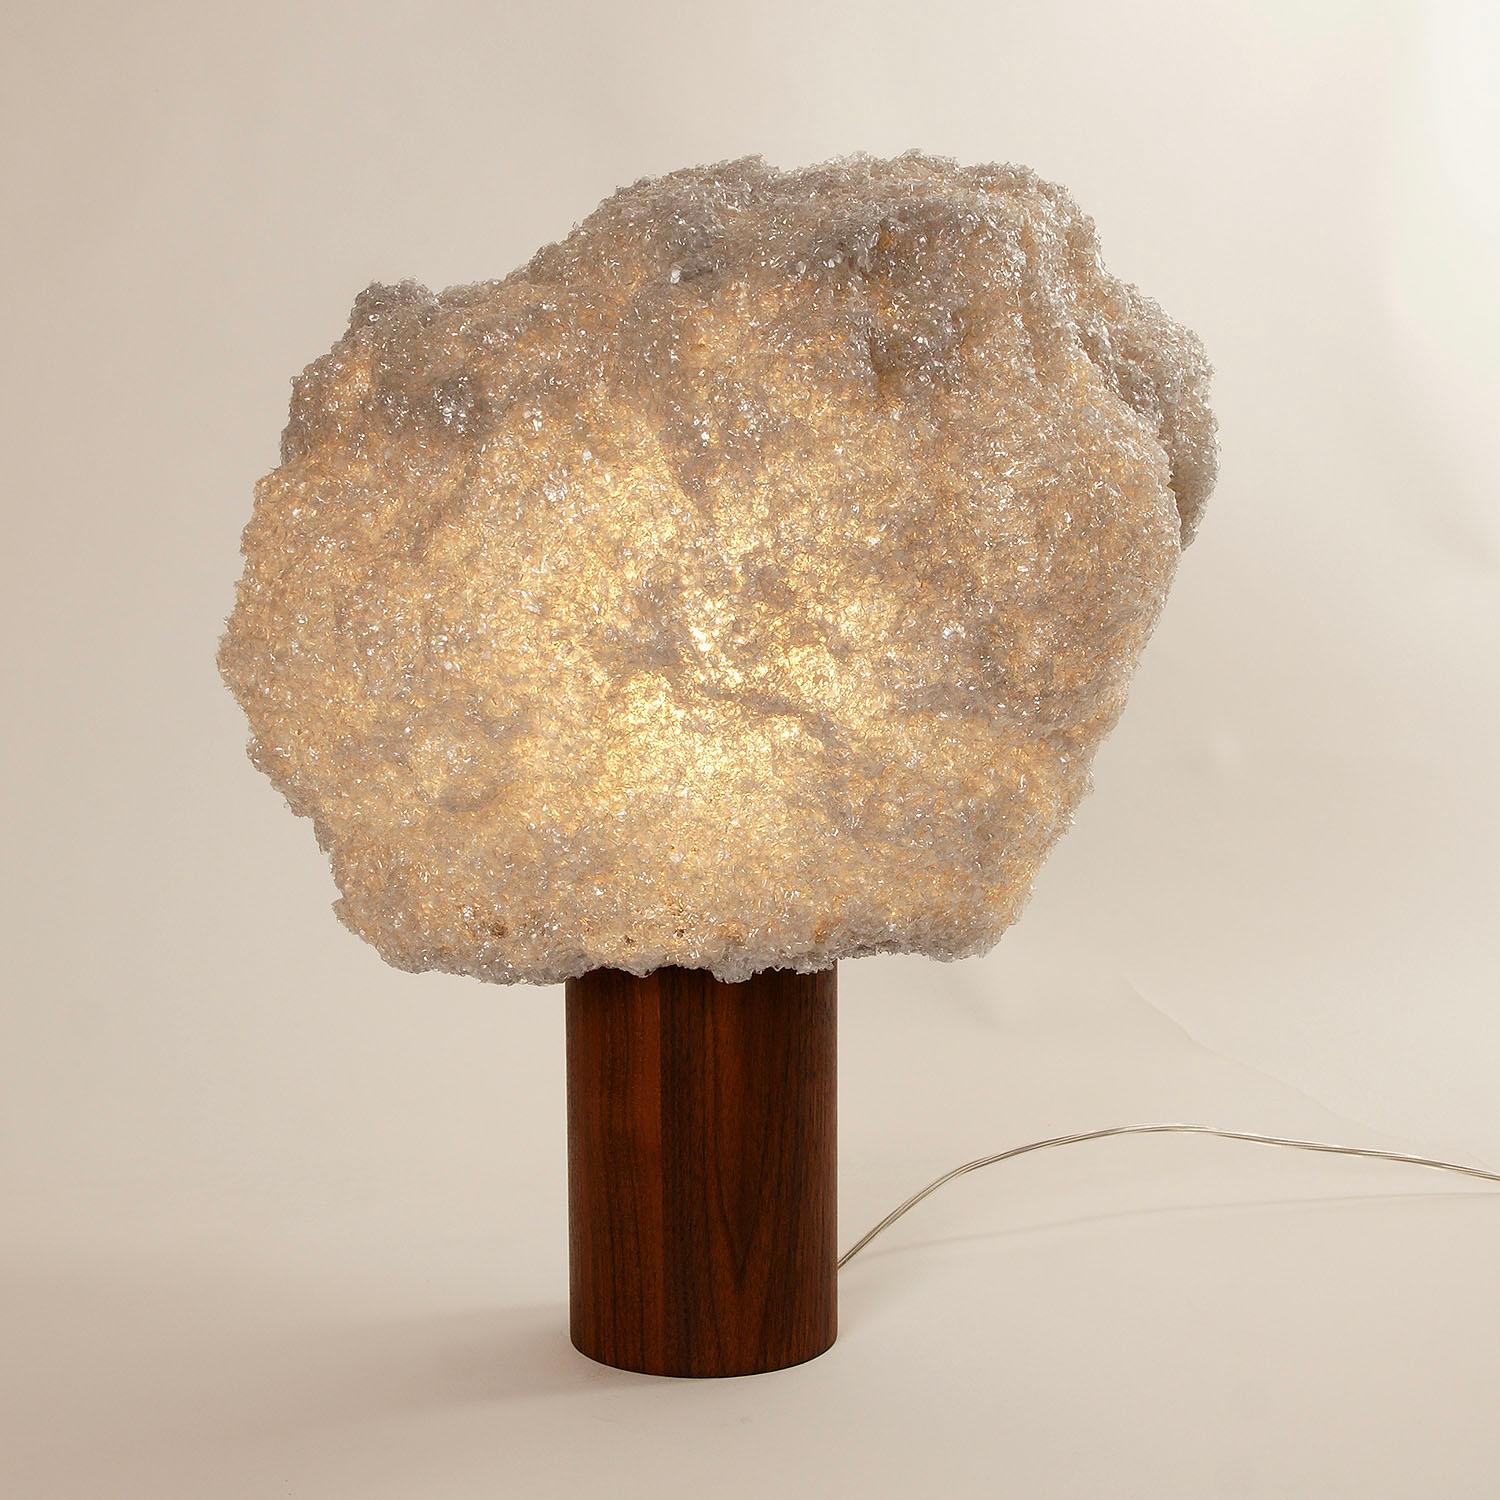 Contemporary Off-White Table Lamp - Storm Light Walnut by Johannes Hemann.
Material: Polycarbonate, Walnut
Dimensions: Ø 42cm x H 52 cm
Material options: white, grey, blue

The Storm Series is by its concept the purest example of a